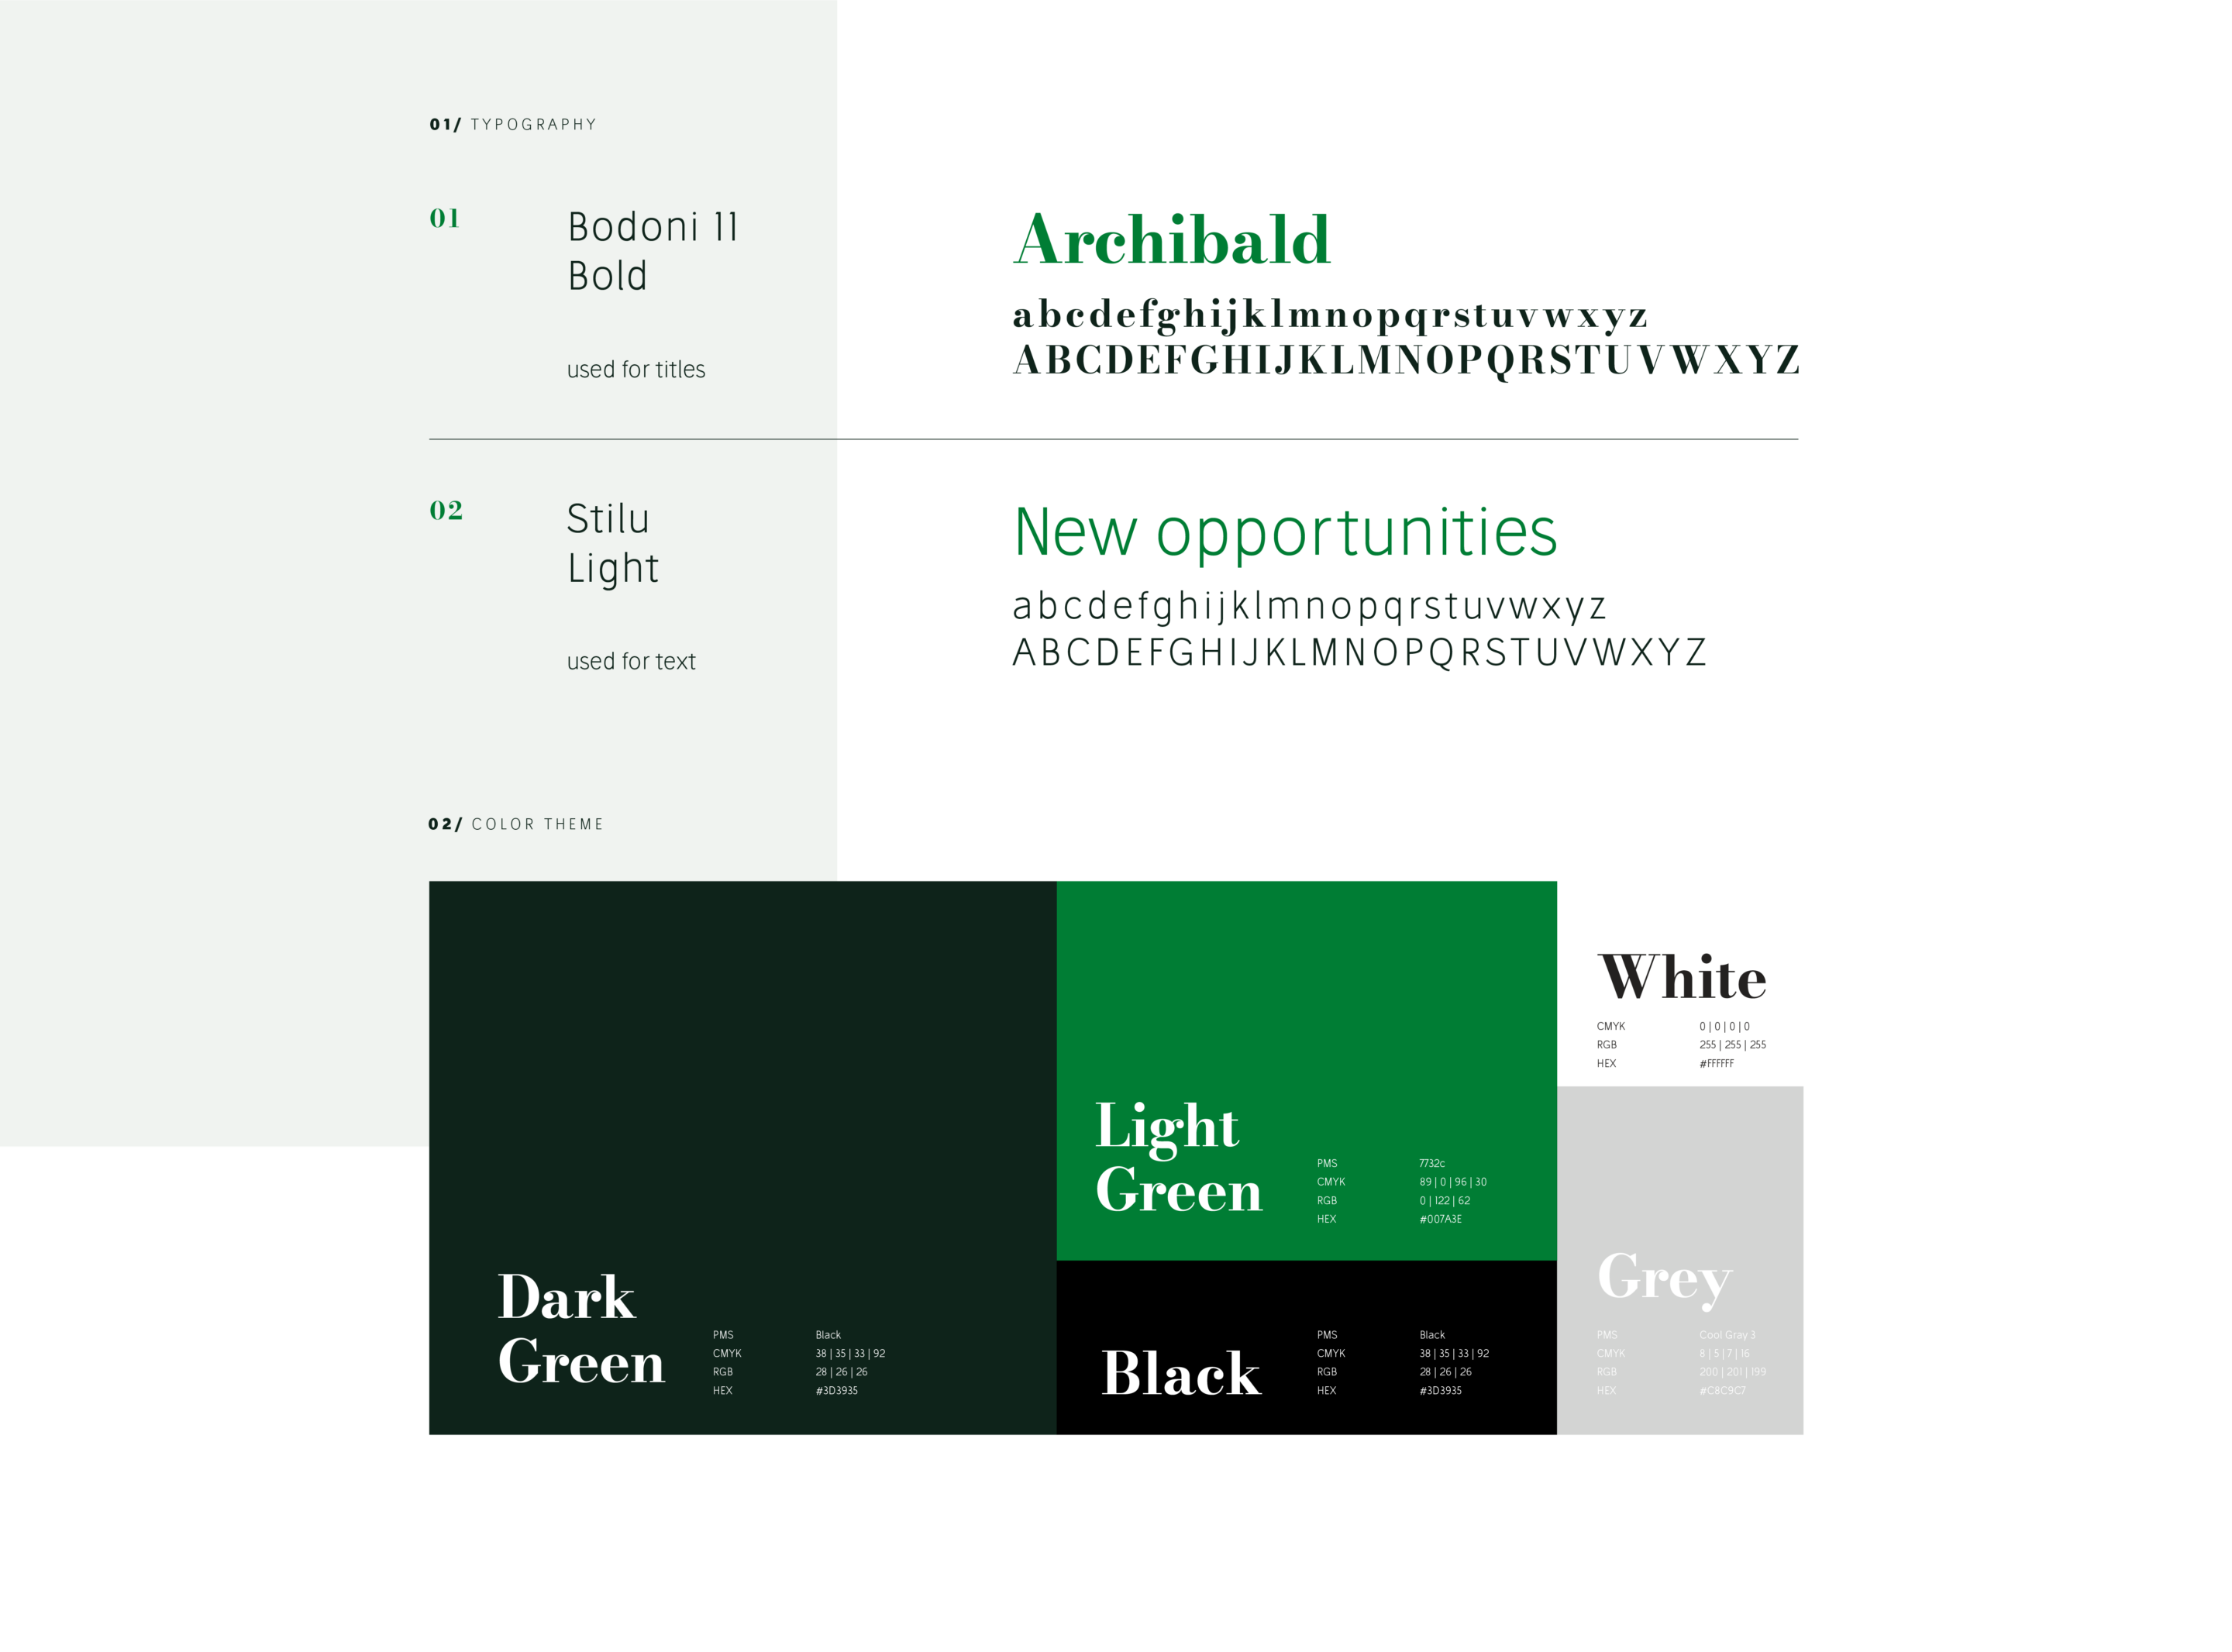 Graphic charter for Archibald's online visual identity by Atelier Design, agence de communication Bruxelles